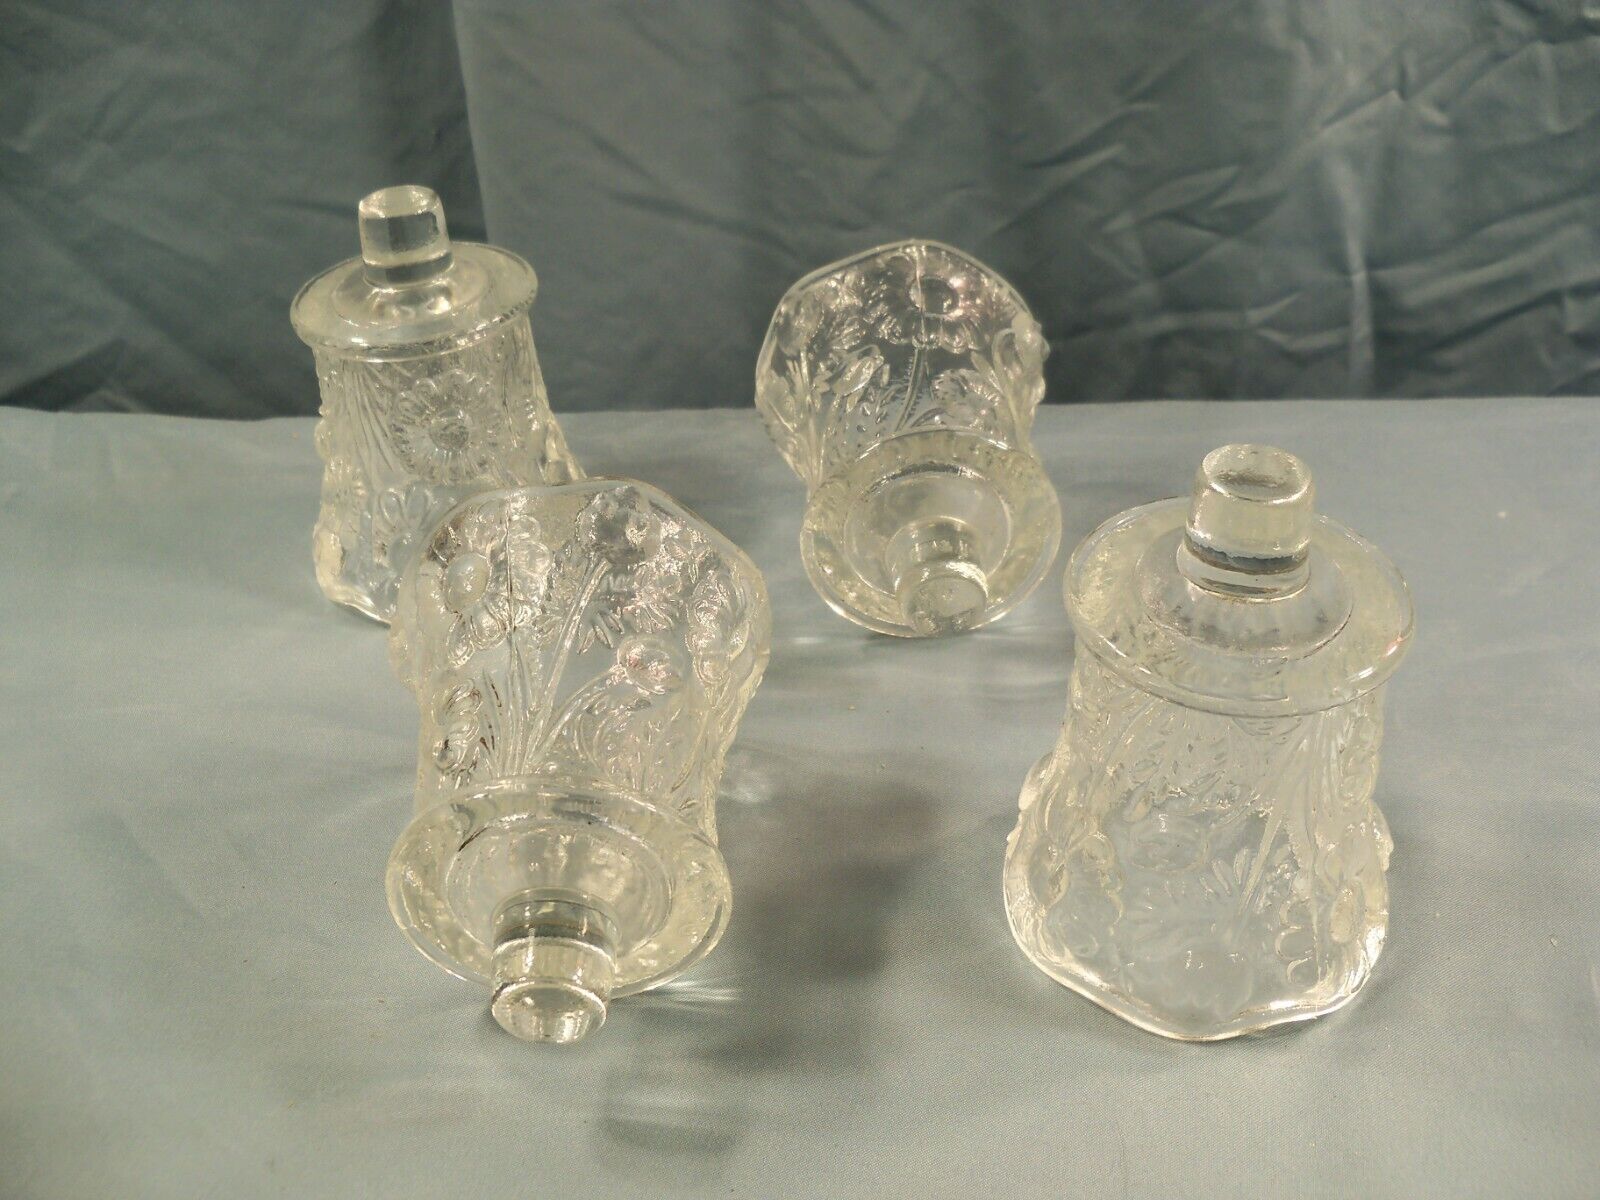 Lot of 4 Clear Glass Peg Pegged Votive Candle Holders w/ Floral Design